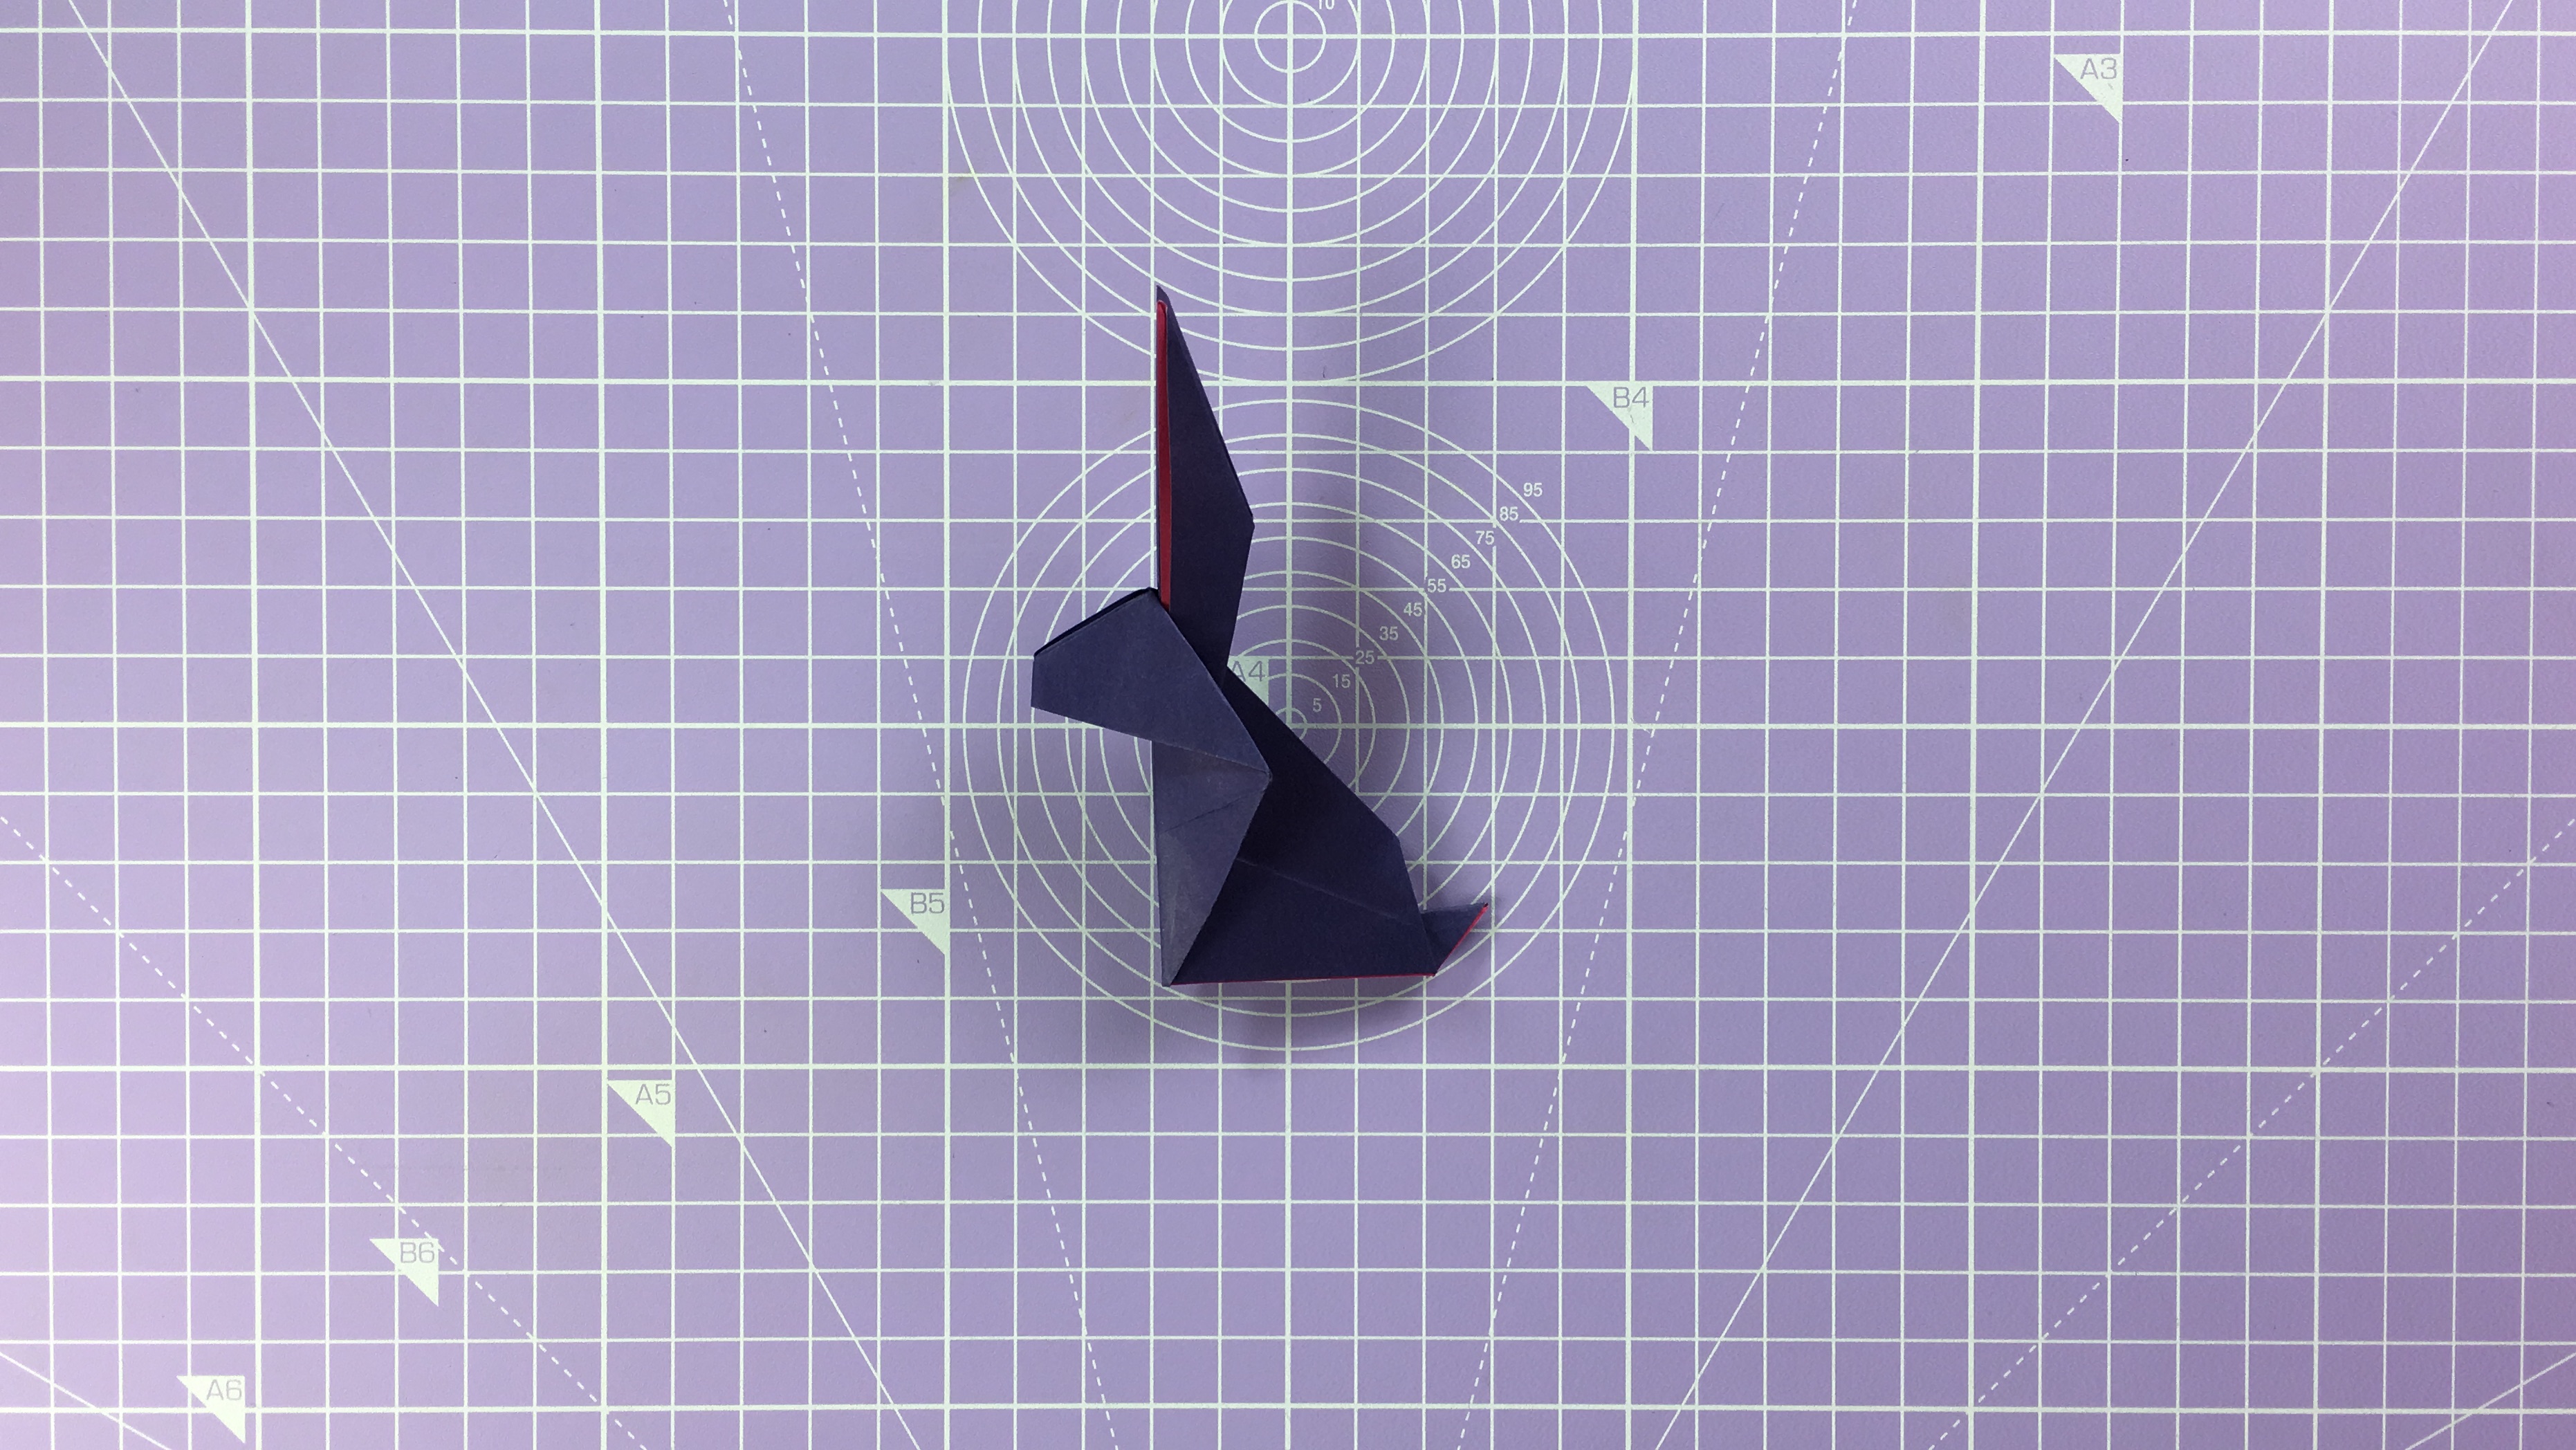 How to make an origami rabbit - step 16